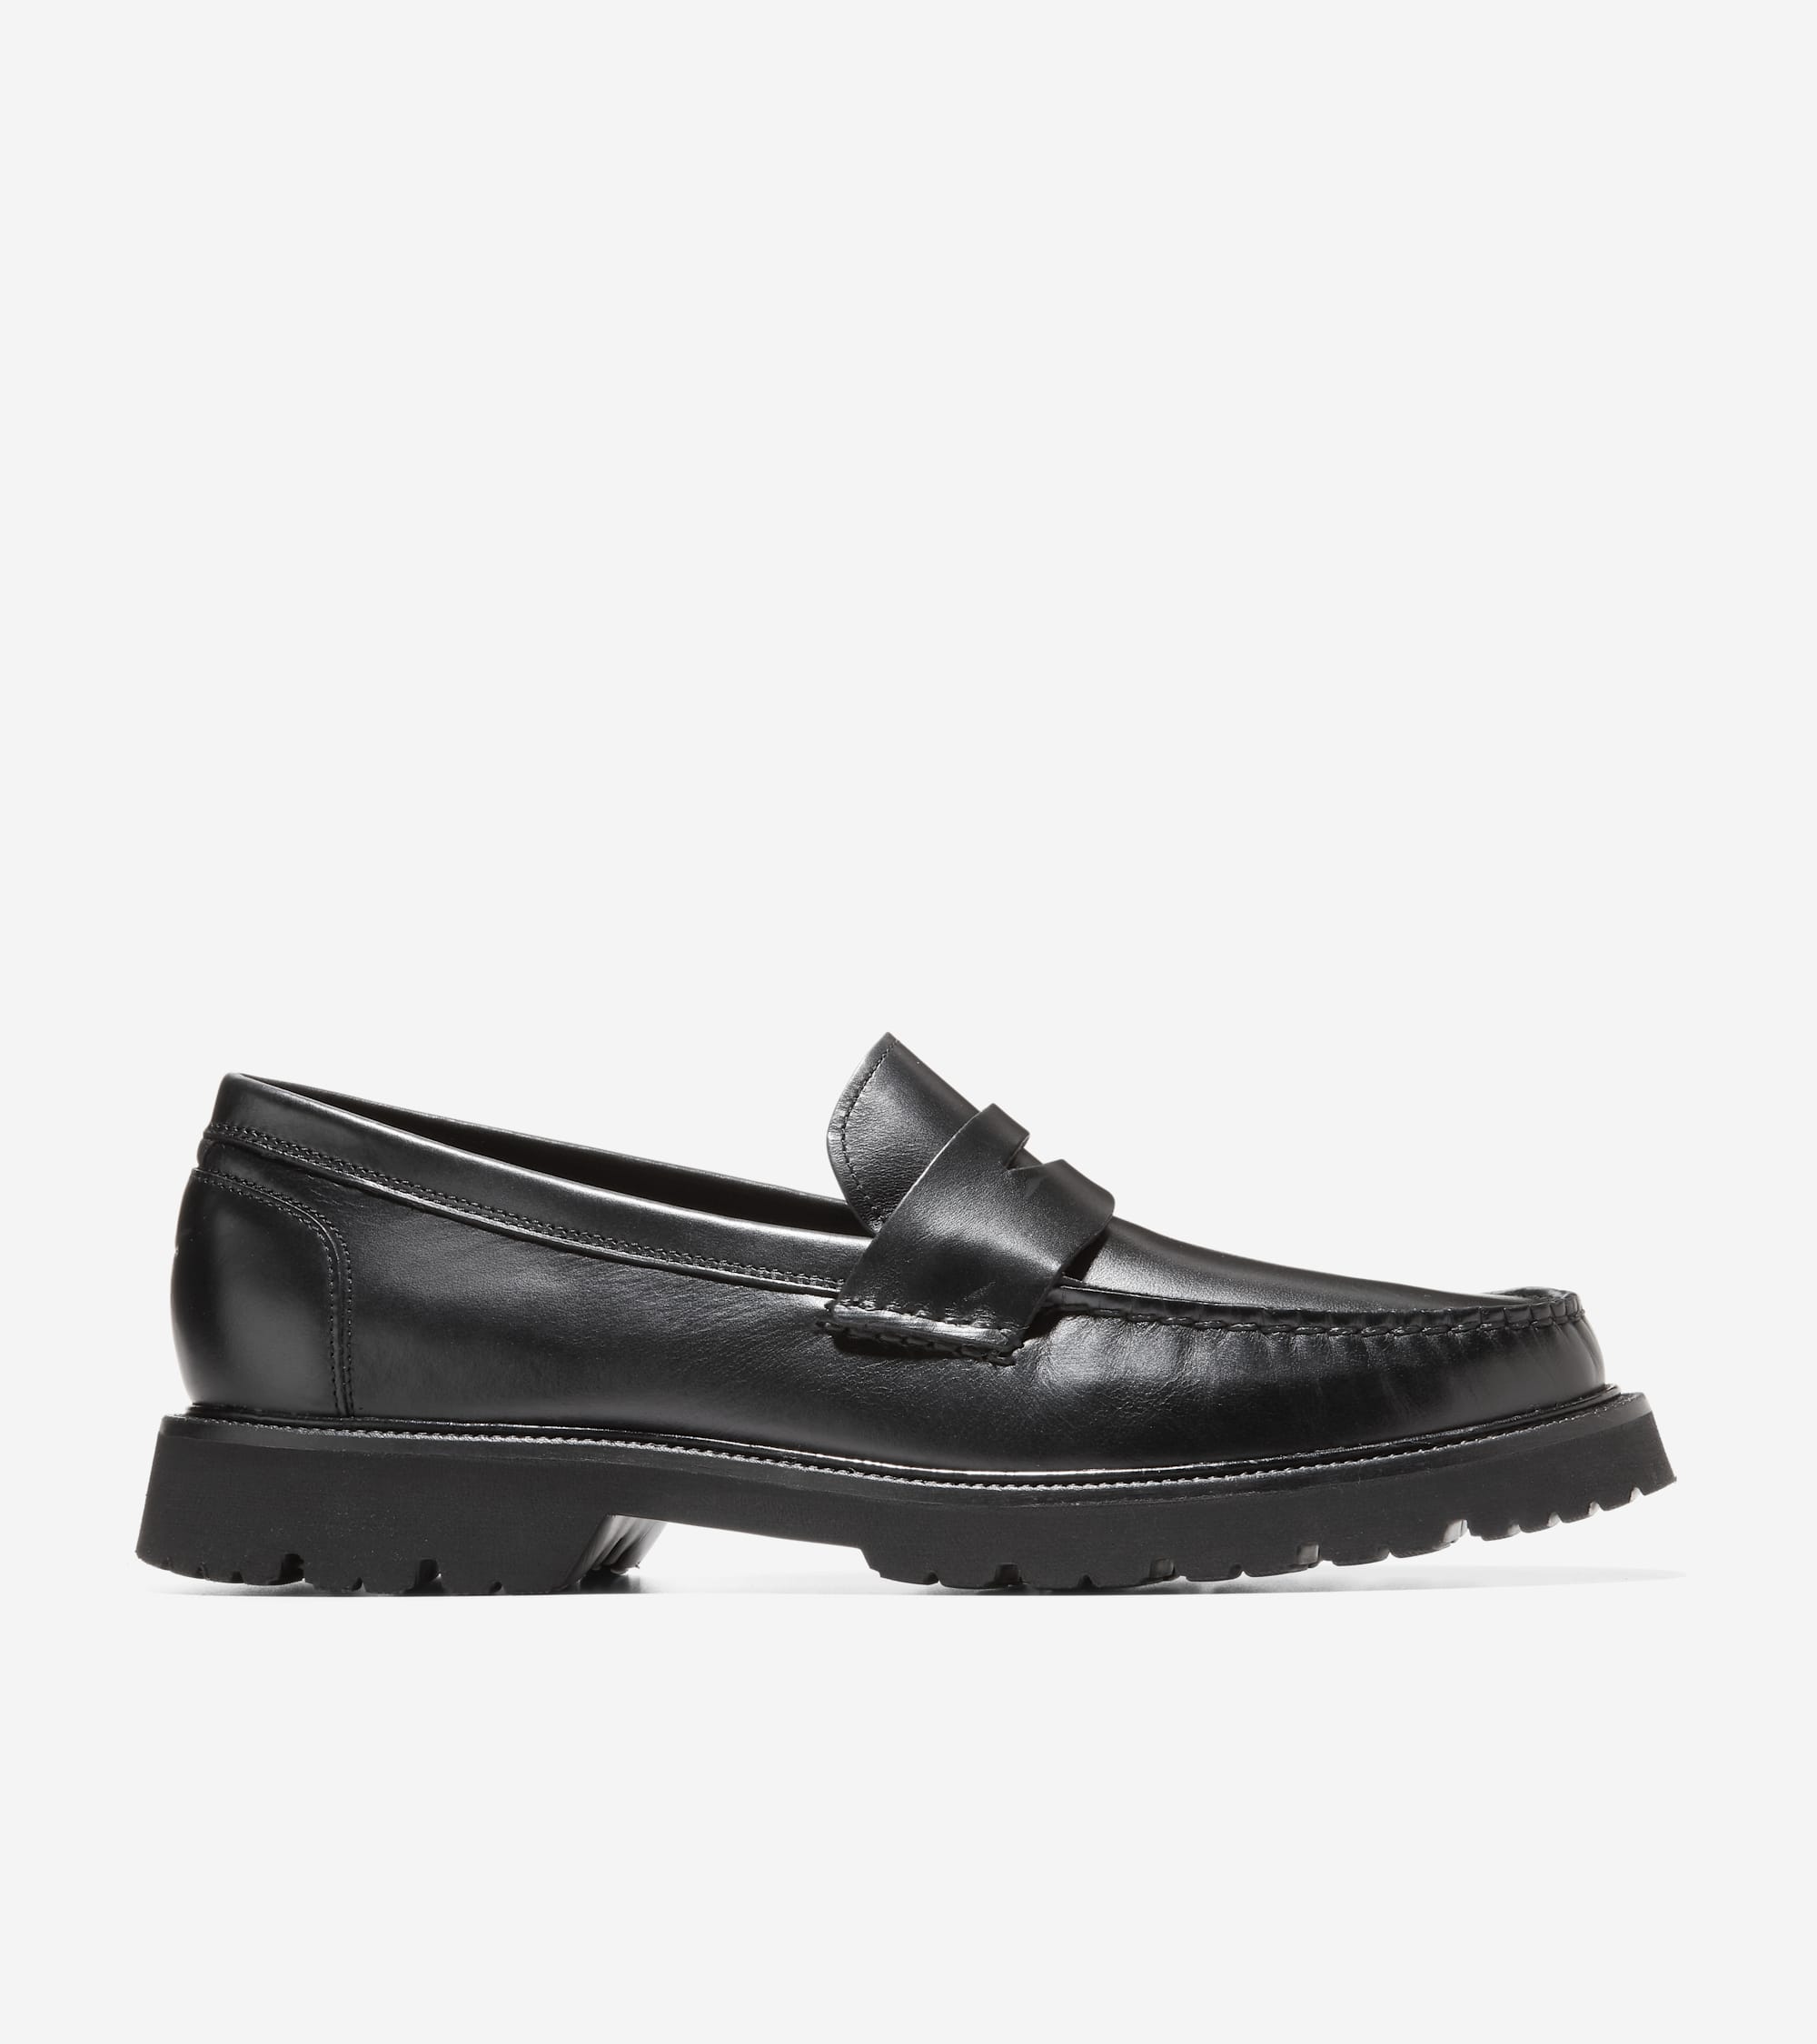 penny loafers - men's spring fashion